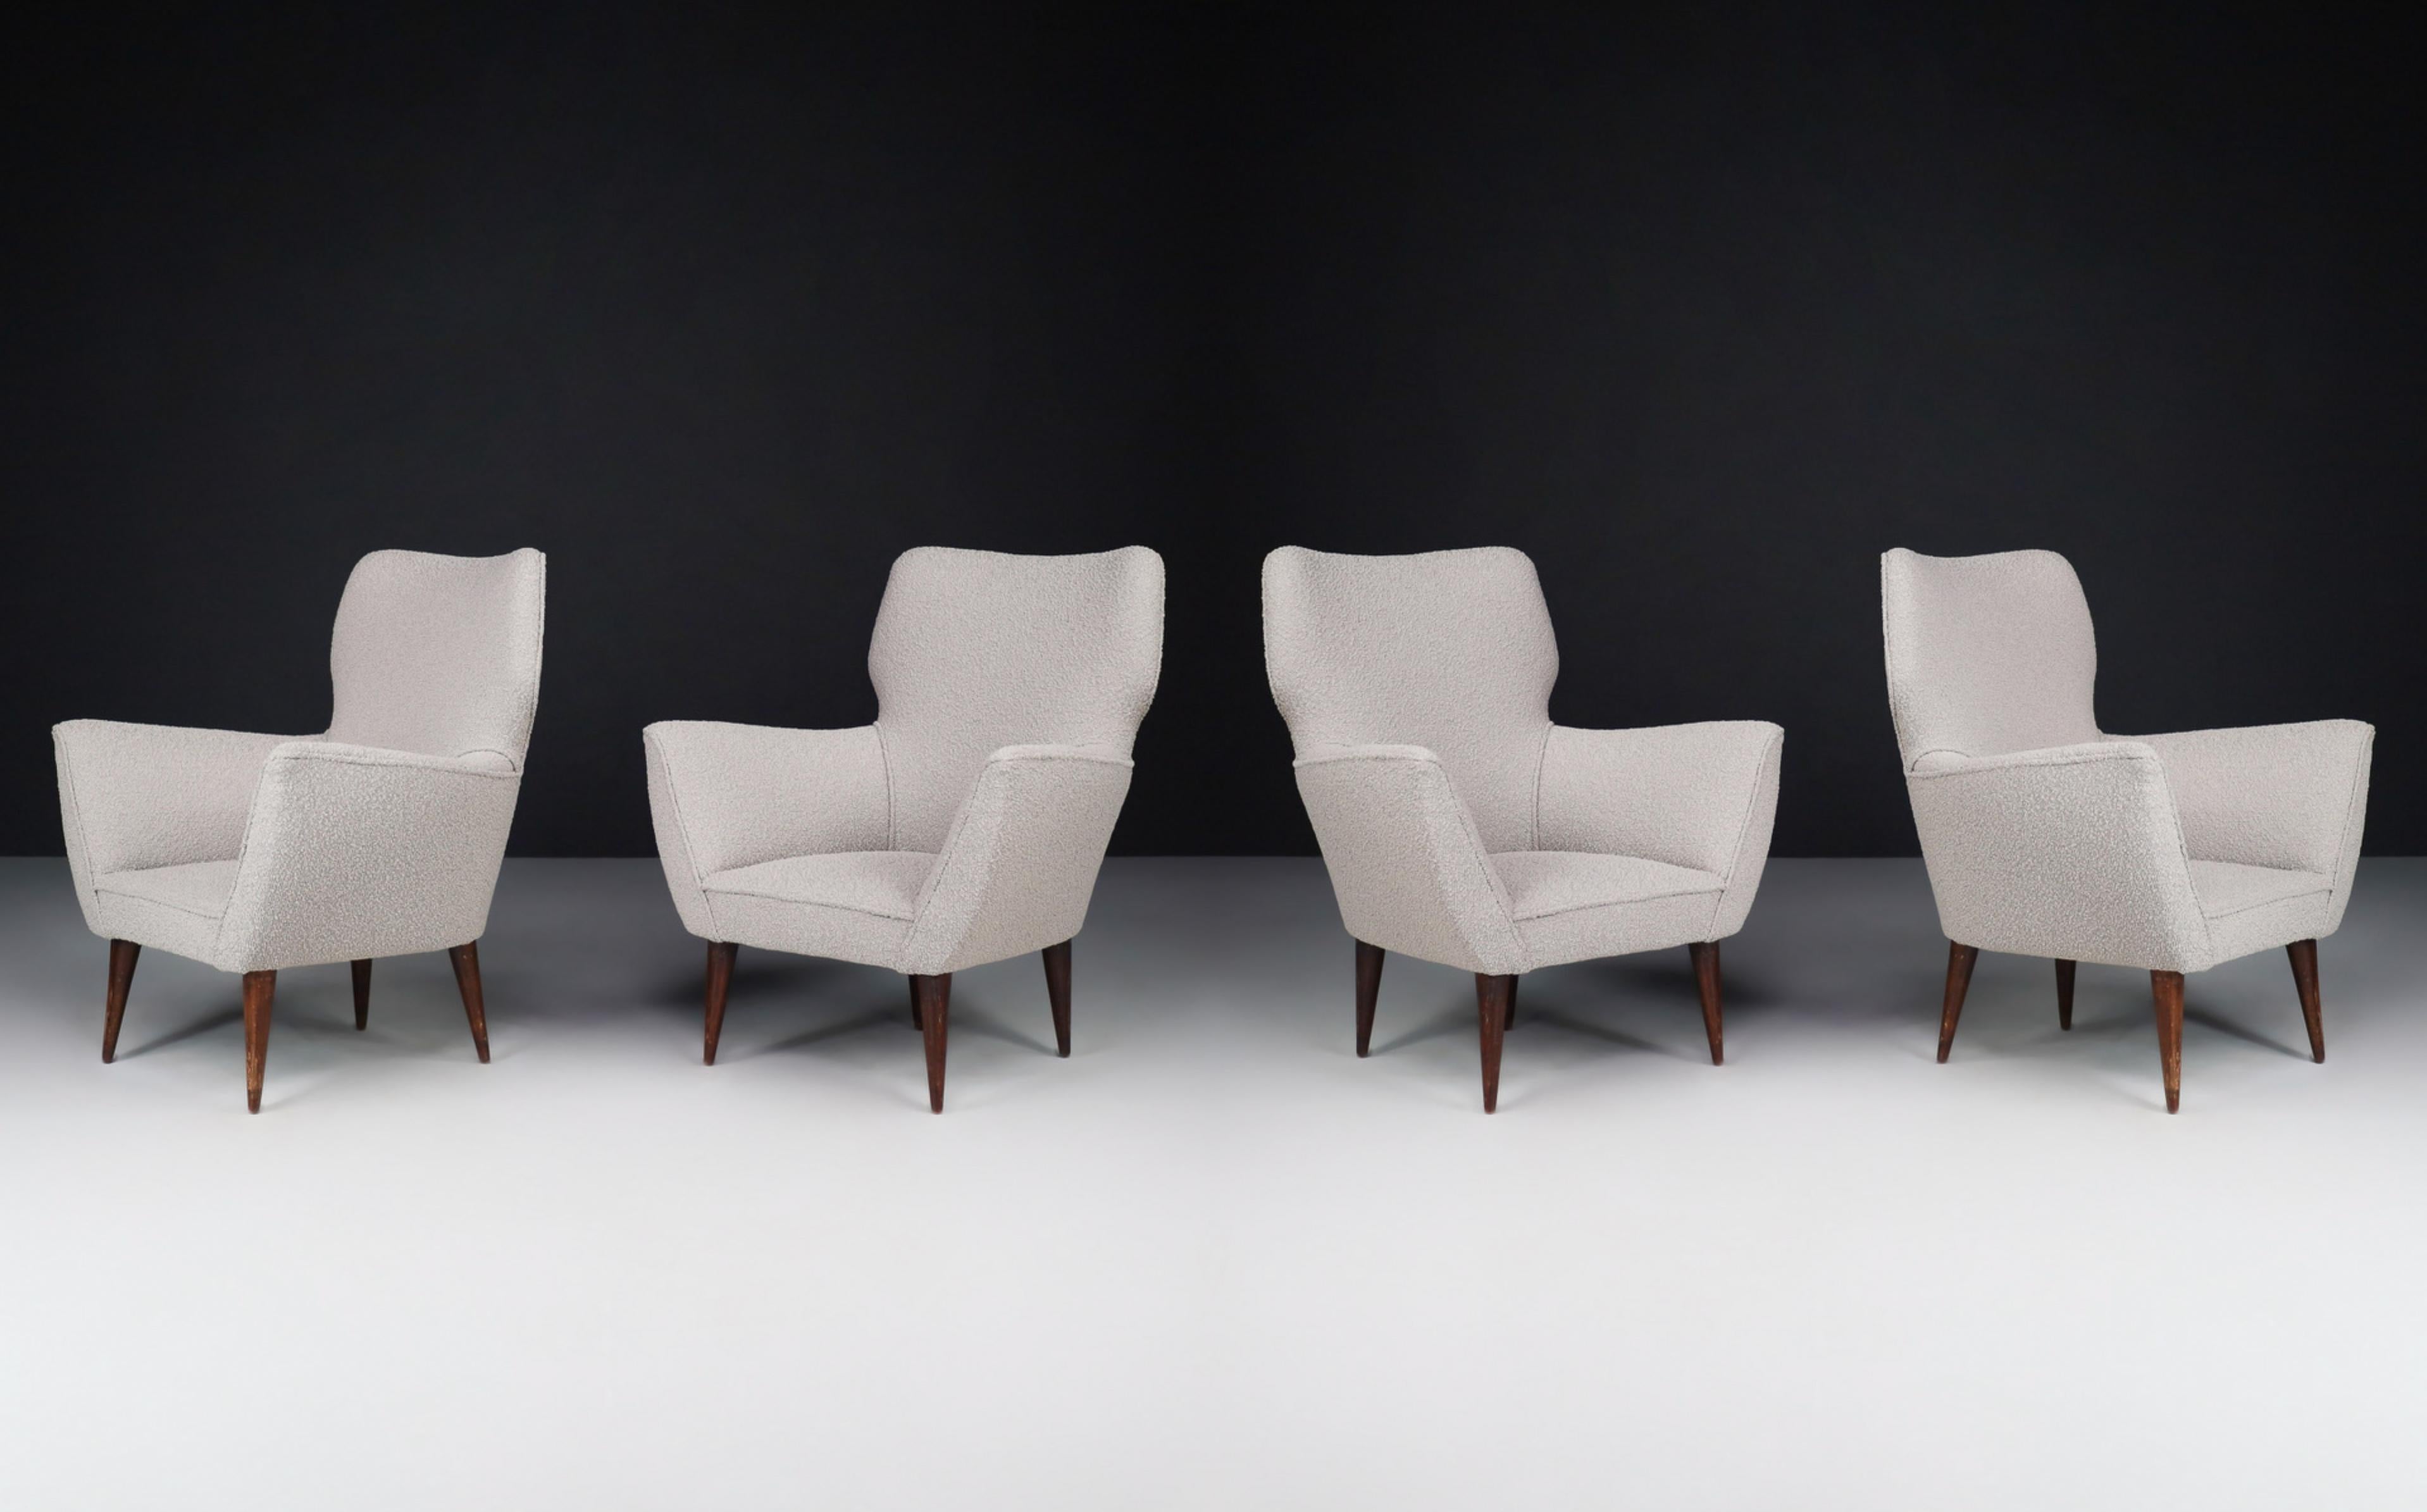 Armchairs with Tapered Wooden Legs in the style of Gio Ponti, Italy, in the 1950s. 

Large set armchairs with tapered wooden legs in new upholstery in the style of Gio Ponti designed and produced in the 1950s in characteristic Italian style.